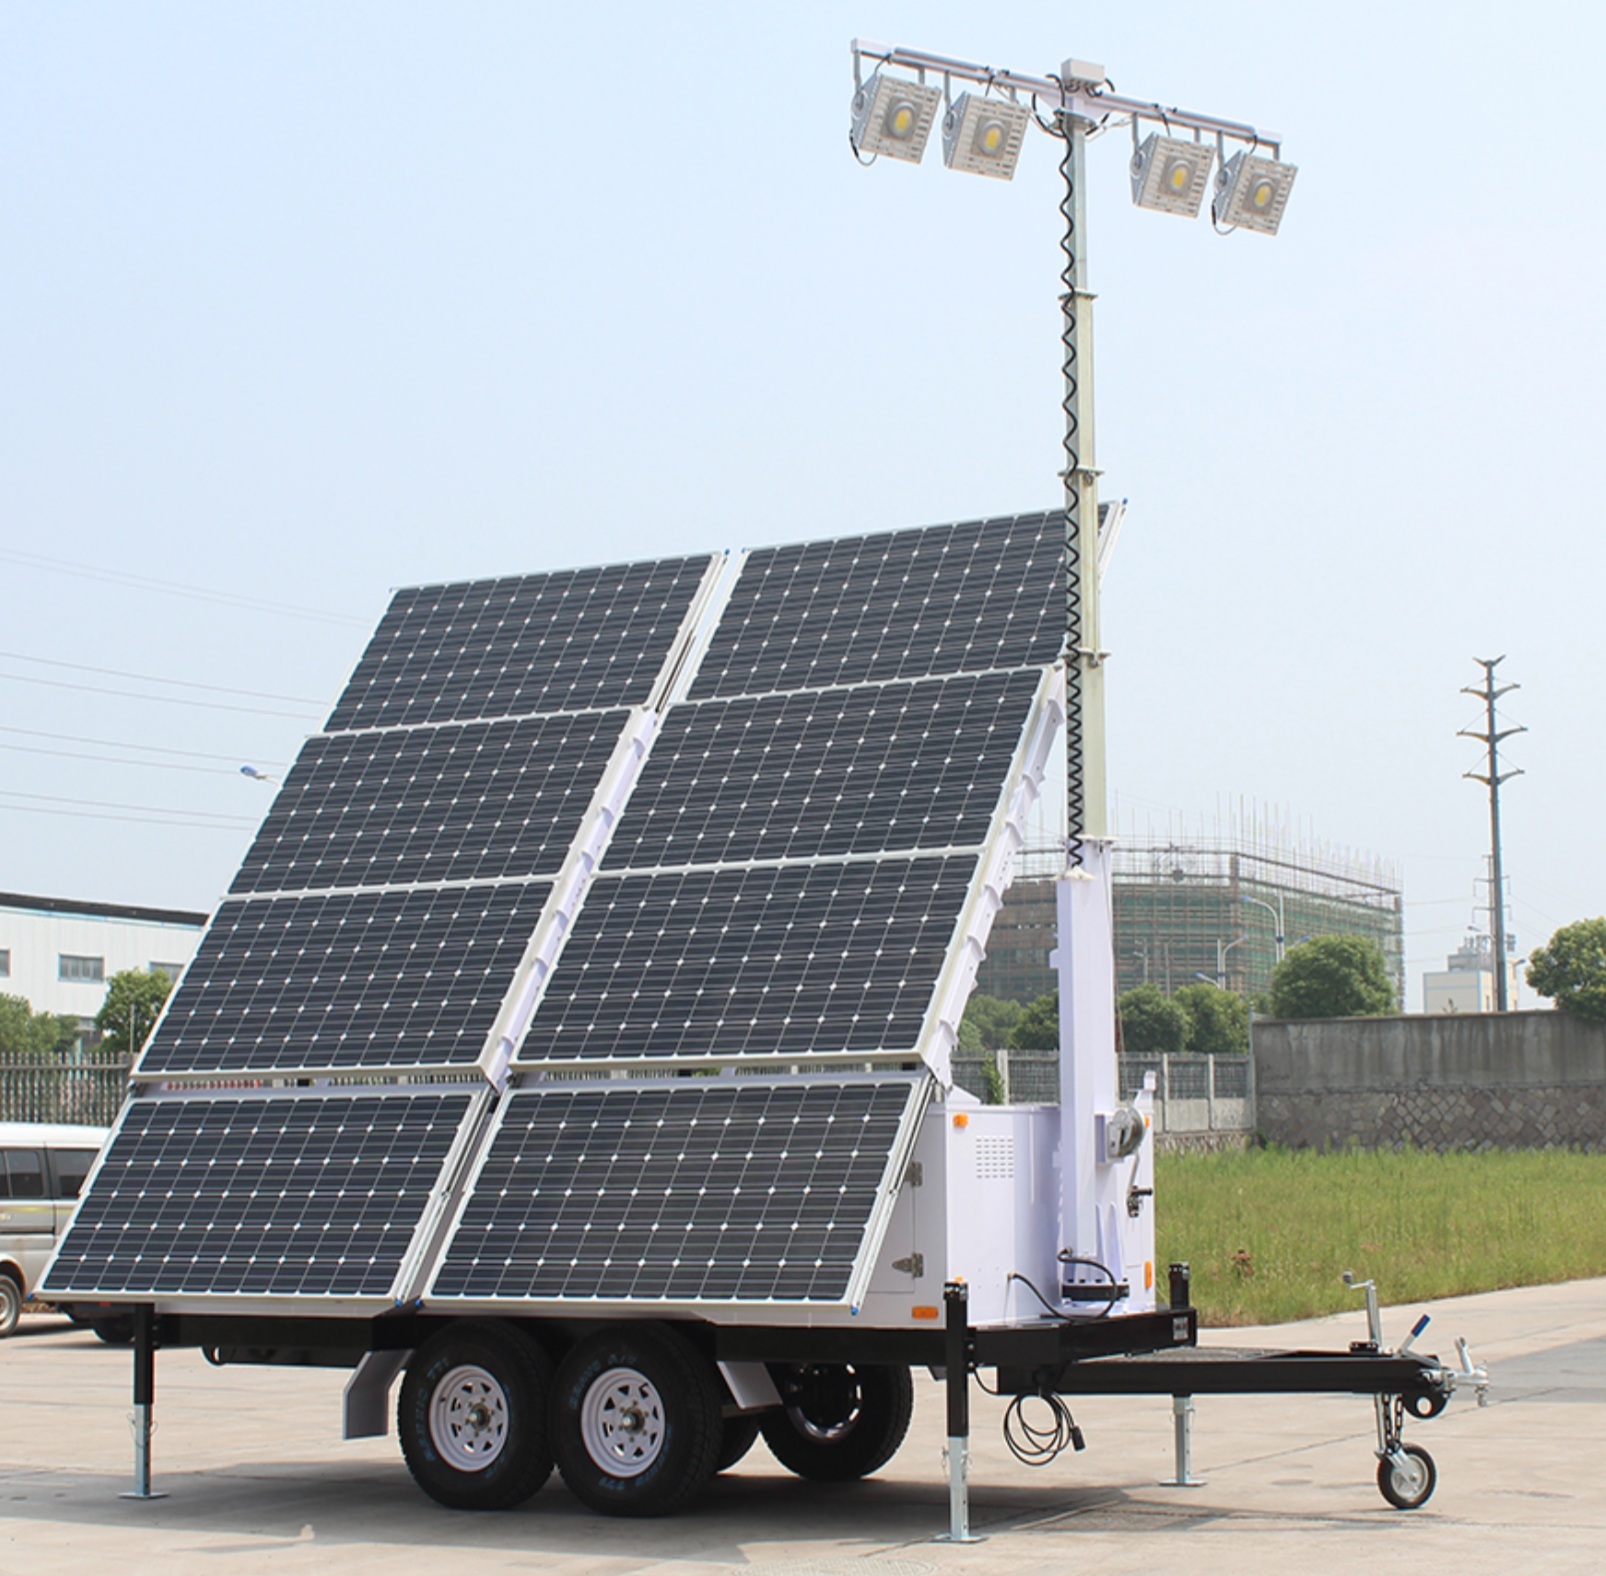 Solar Lights Tower, Job Site Solar Lights Tower, Disaster Relief Solar Light Tower, Solar Powered Trailers, Solar Trailers, Solar Light Tower, Light Tower, Solar Light Tower Quadcon Containers, Solar Light Tower Quadcon Containers Solar Trailers, Solar Trailer Solar Light Tower Quadcon Containers. Used Through Out The United States and World wide by FEMA Federal Emergency Management Agency, DHS Department of Homeland Security, Disaster Recovery Efforts, Red Cross Disaster Relief, Disaster Preparedness & Recovery.